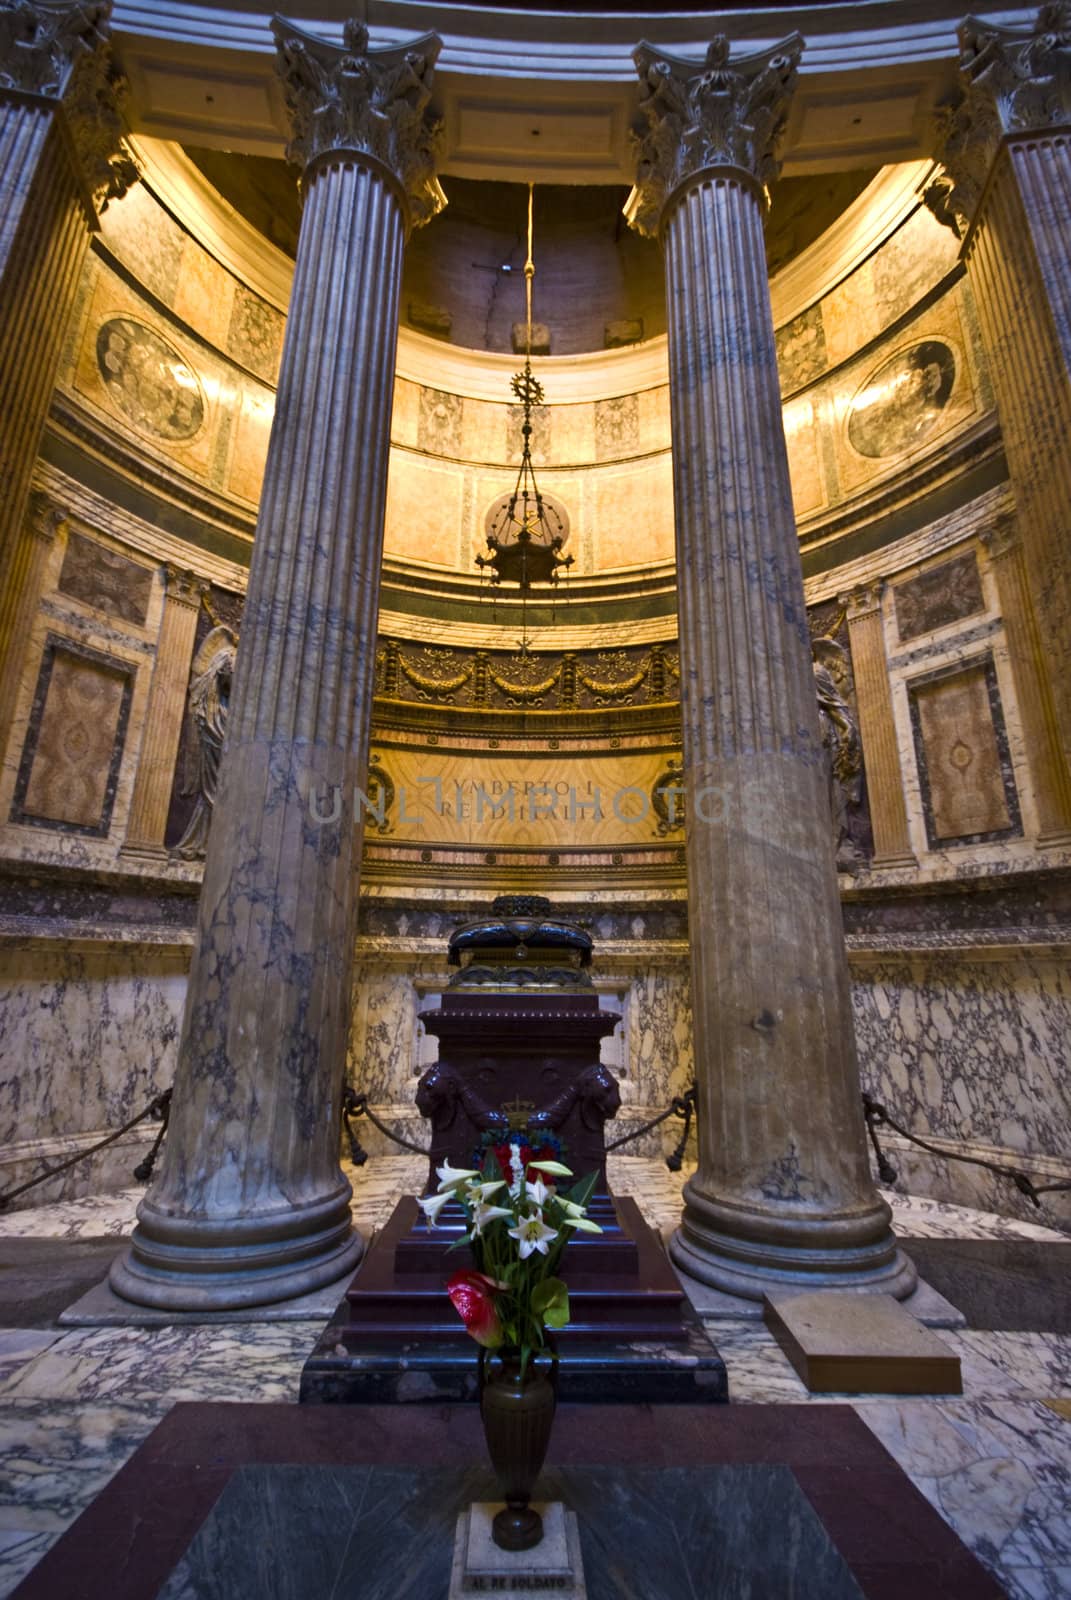 tombstone for king Umberto I in the Pantheon in Rome